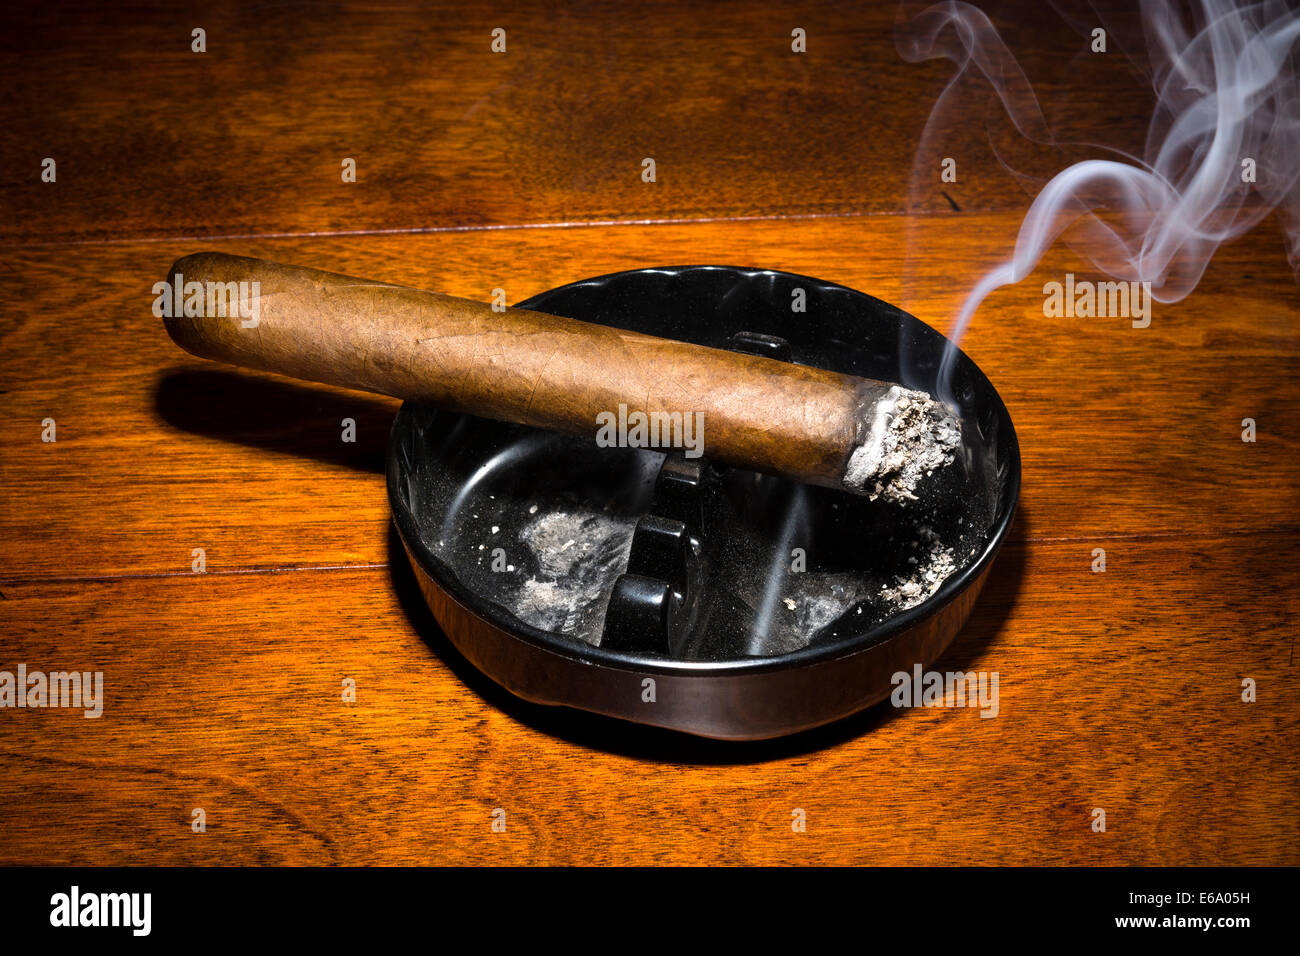 A burning cigar in a classic black ashtray streaming smoking in a dark, moody setting. Stock Photo